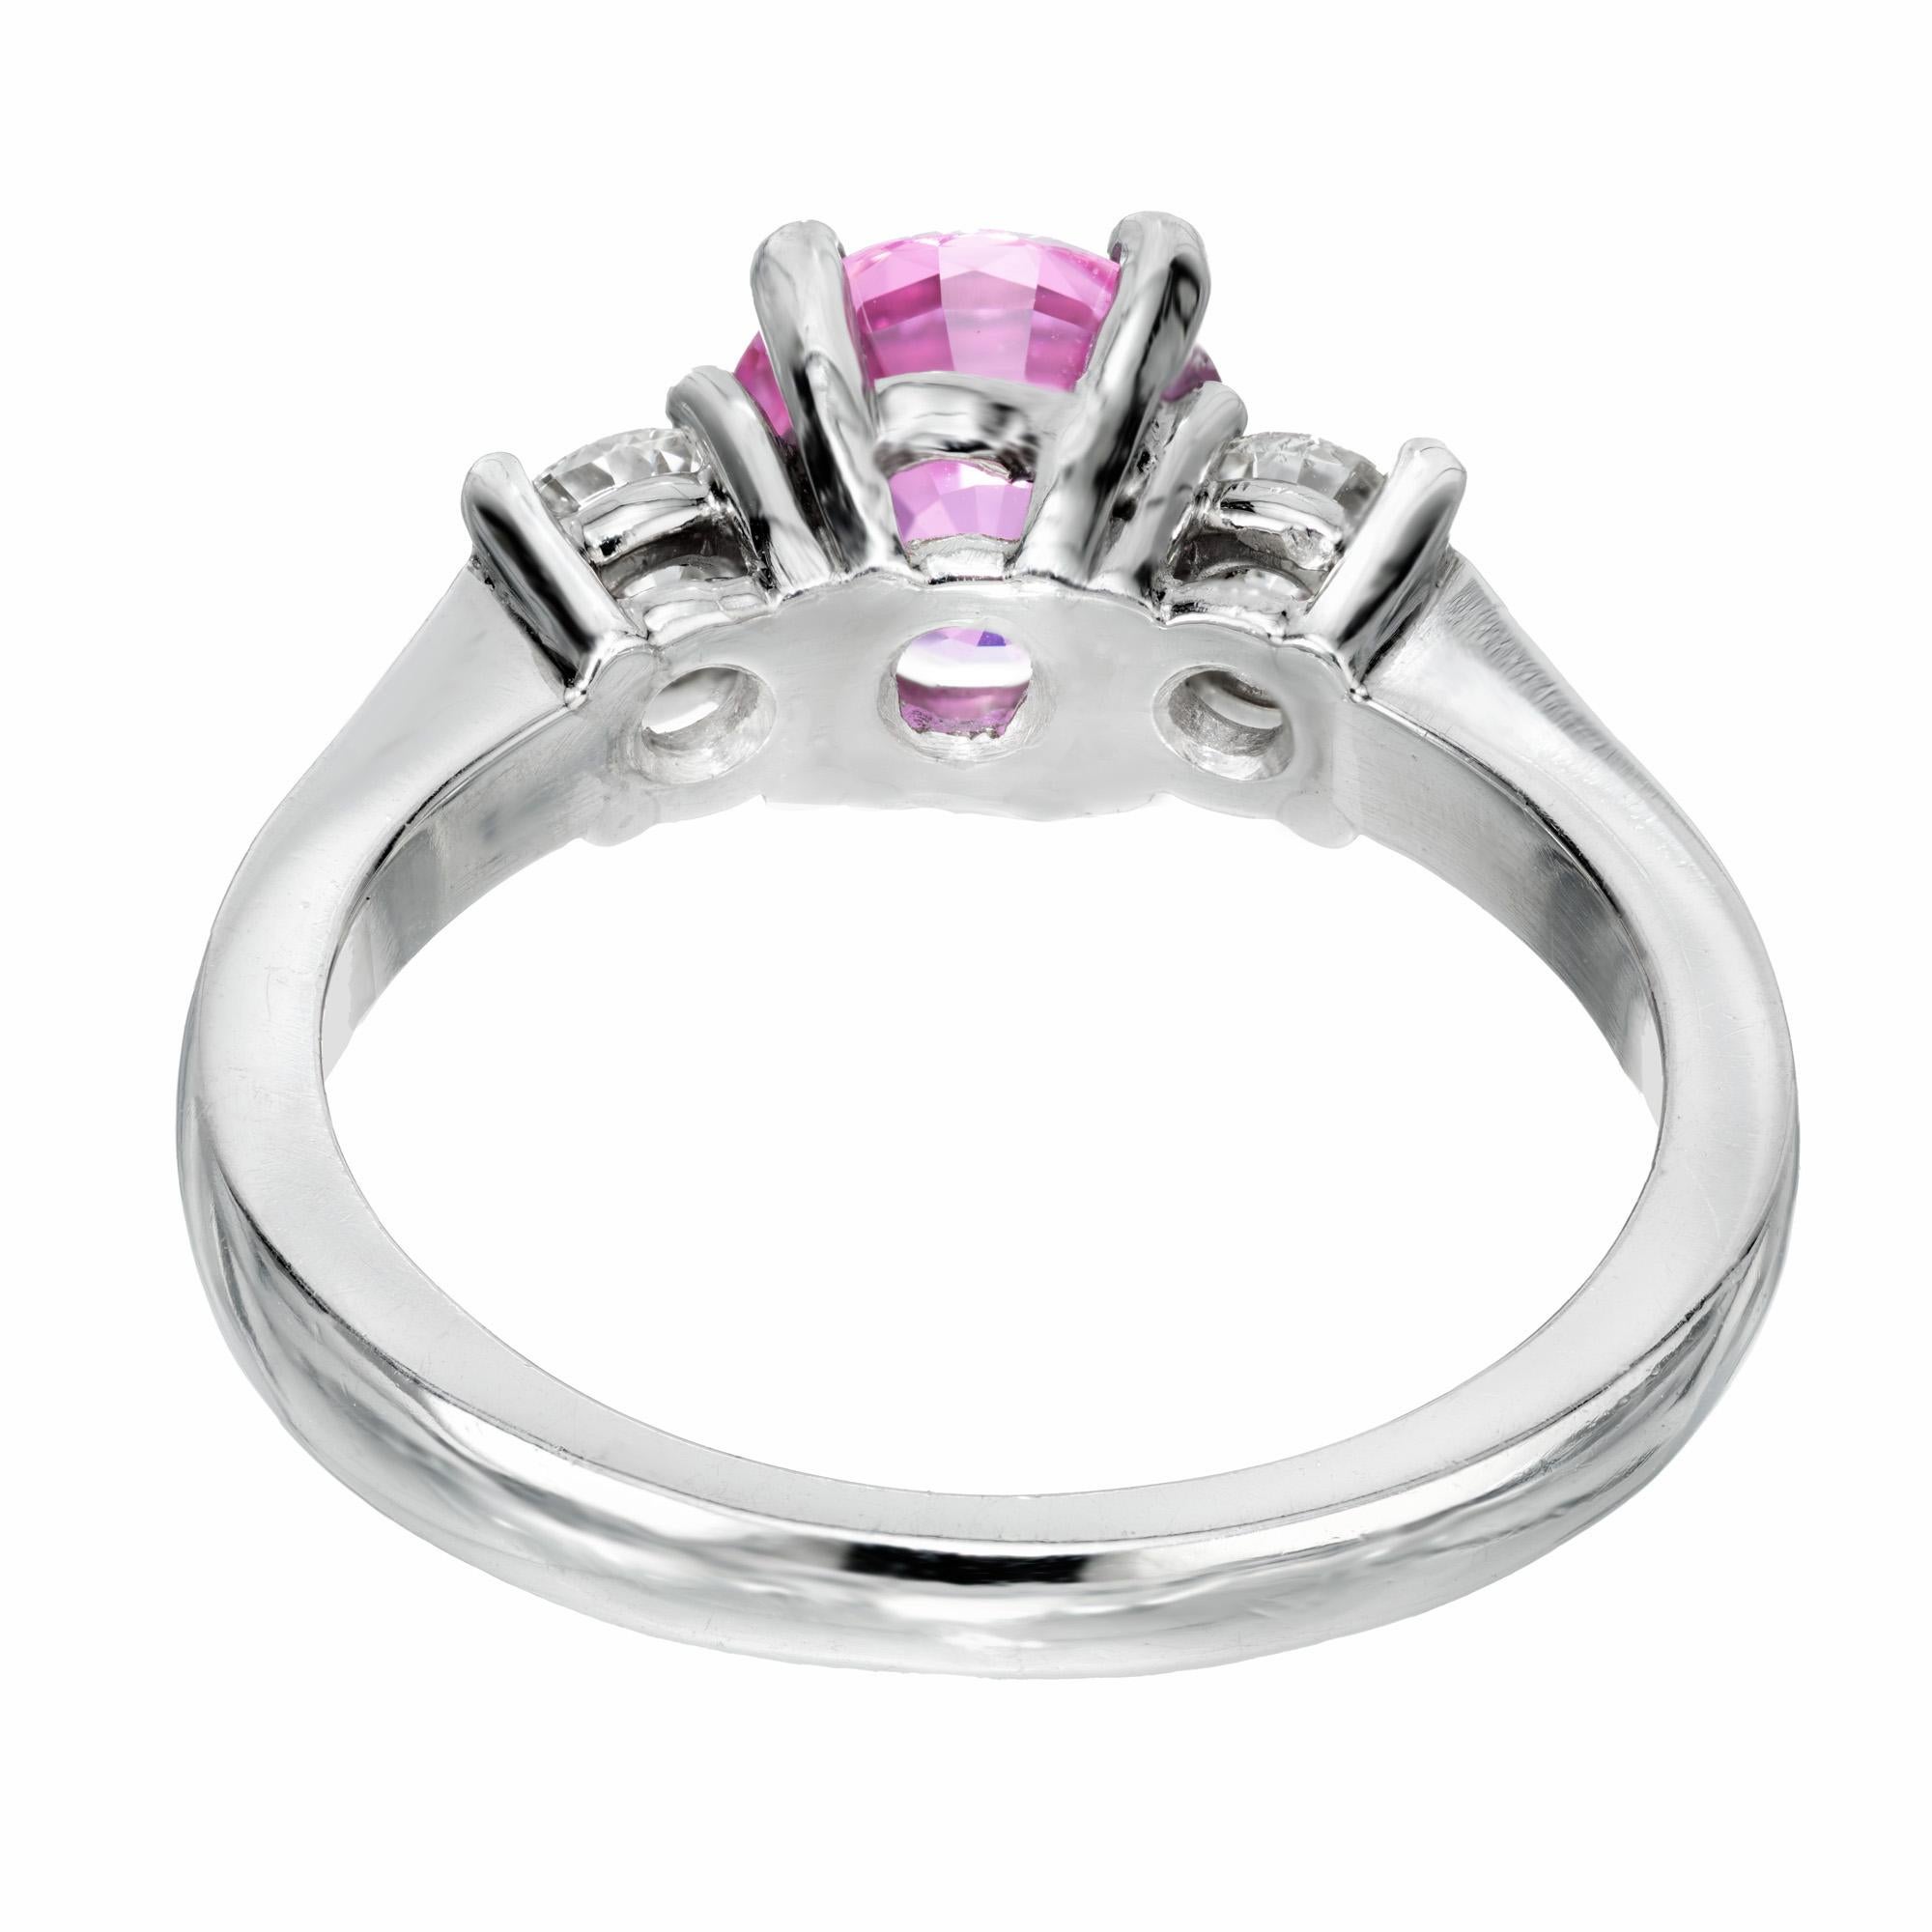 For Sale:  AGL Certified 1.79 Carat Pink Sapphire Diamond Platinum Engagement Ring 5